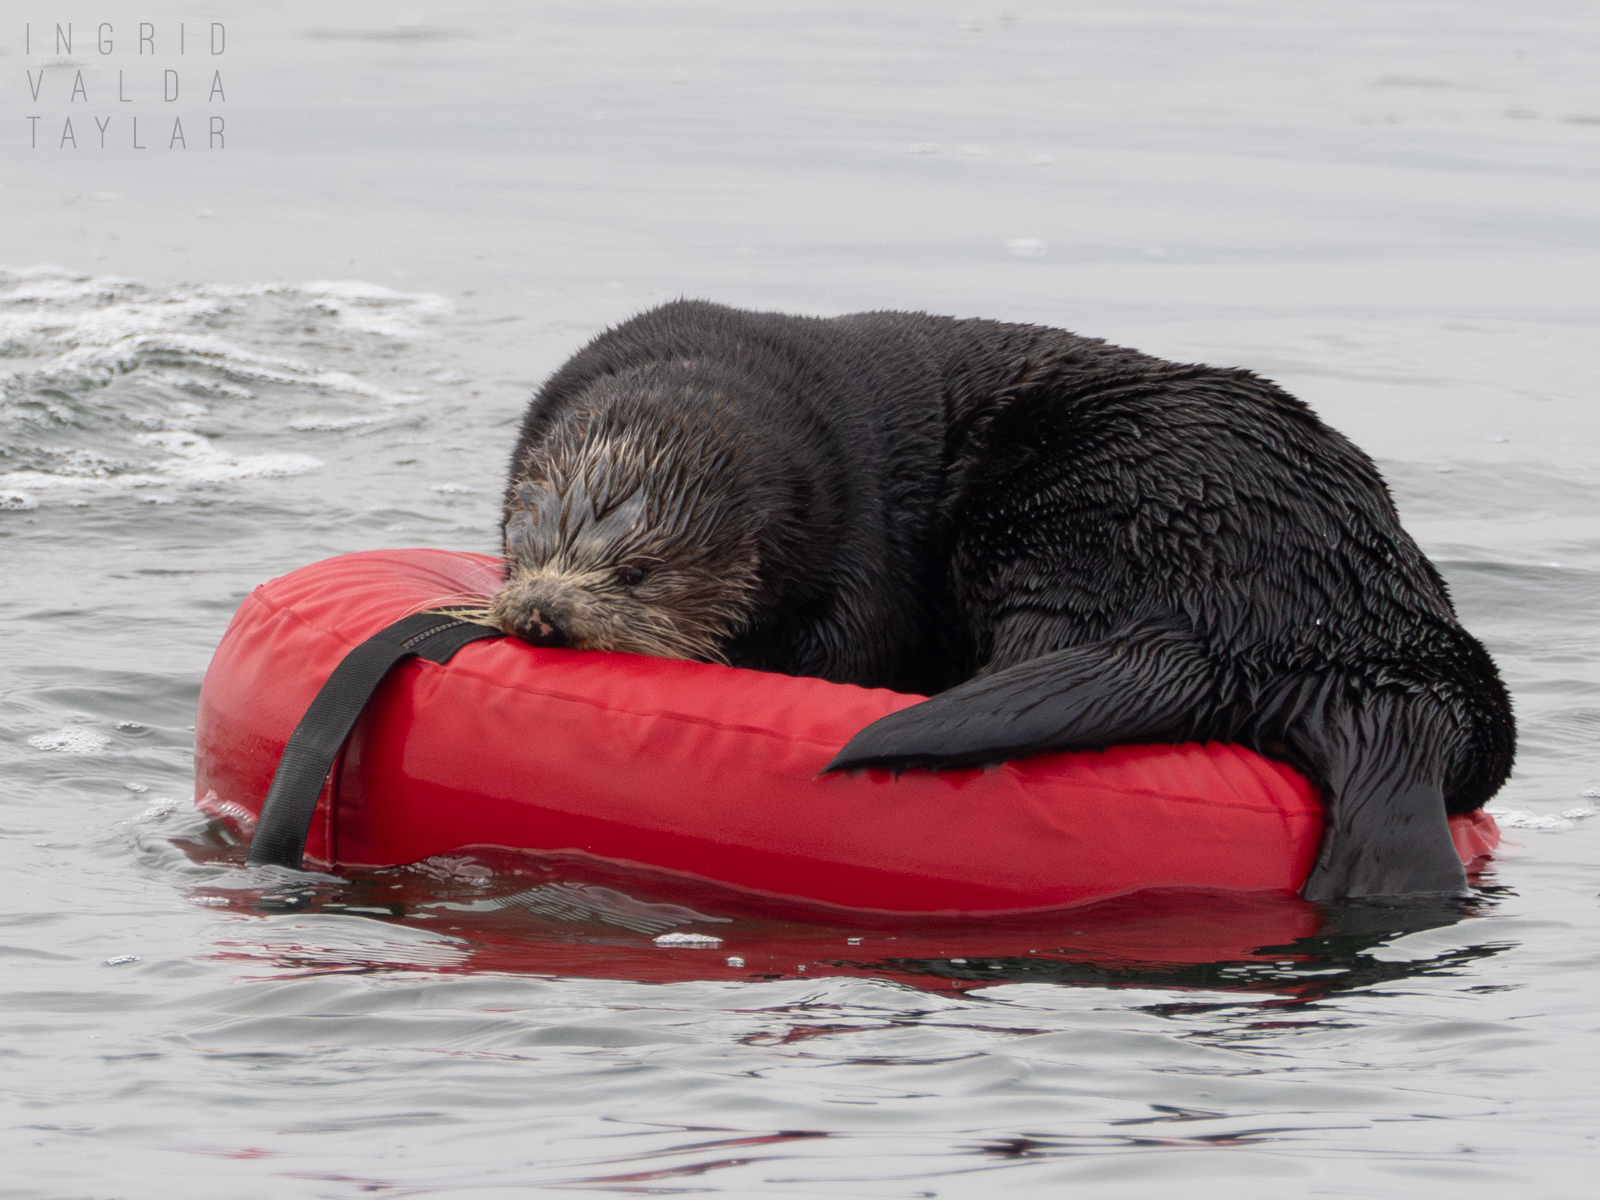 Sea Otter on Red Diver's Float